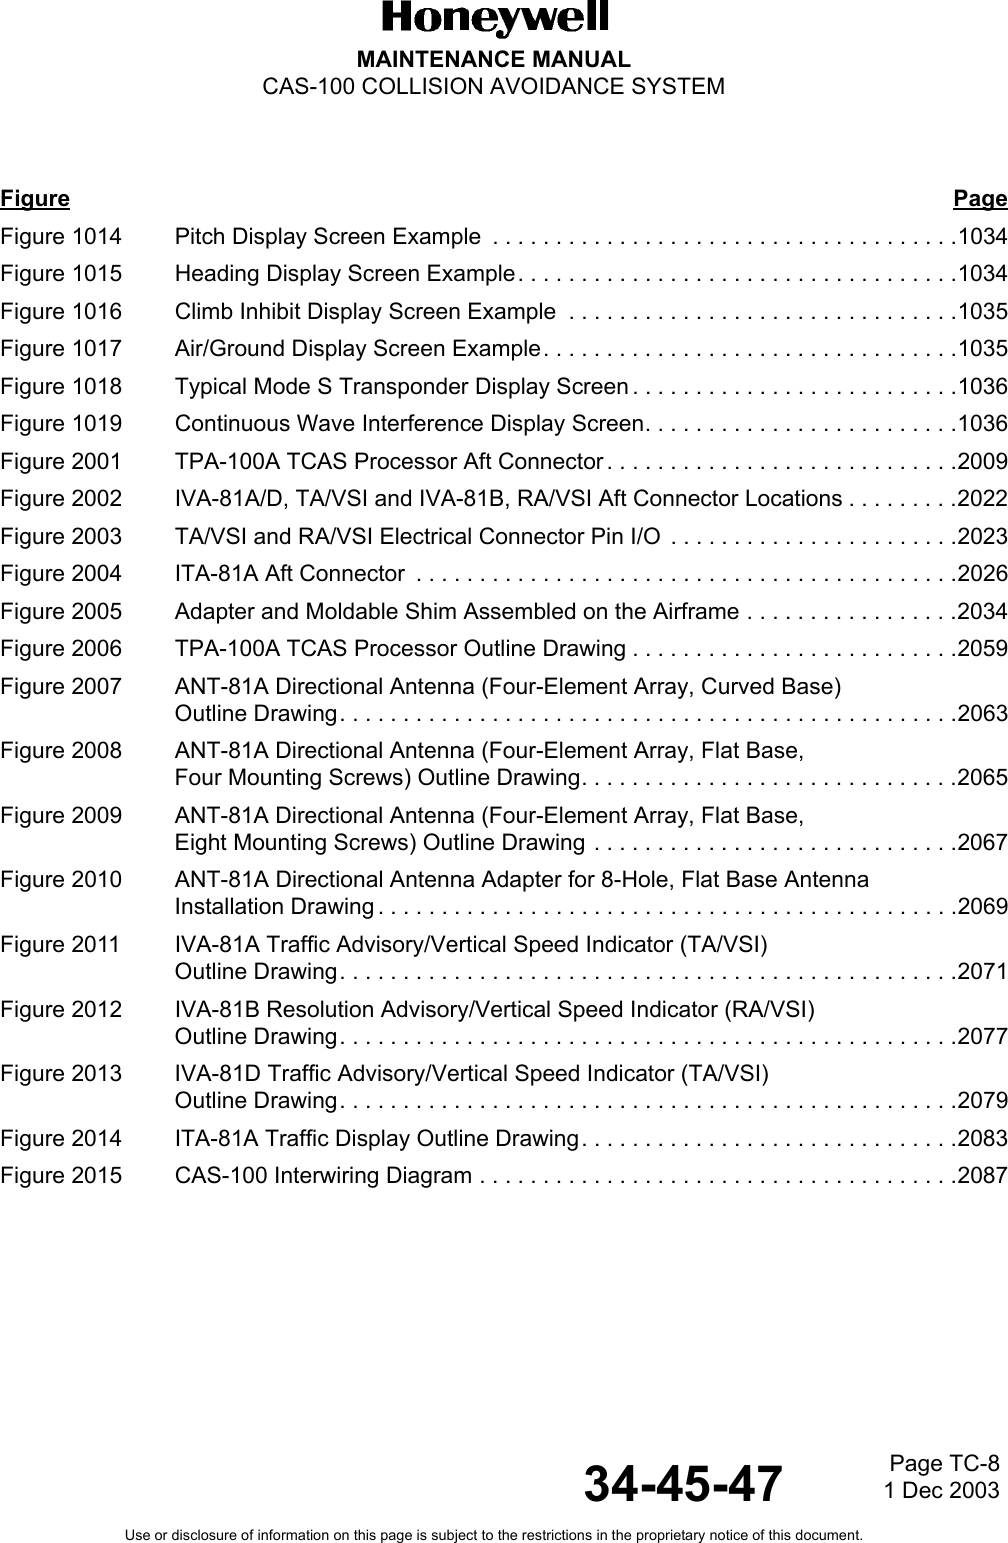 MAINTENANCE MANUALCAS-100 COLLISION AVOIDANCE SYSTEMUse or disclosure of information on this page is subject to the restrictions in the proprietary notice of this document.34-45-47Page TC-81 Dec 2003Figure 1014 Pitch Display Screen Example  . . . . . . . . . . . . . . . . . . . . . . . . . . . . . . . . . . . . .1034Figure 1015 Heading Display Screen Example. . . . . . . . . . . . . . . . . . . . . . . . . . . . . . . . . . .1034Figure 1016 Climb Inhibit Display Screen Example  . . . . . . . . . . . . . . . . . . . . . . . . . . . . . . .1035Figure 1017 Air/Ground Display Screen Example. . . . . . . . . . . . . . . . . . . . . . . . . . . . . . . . .1035Figure 1018 Typical Mode S Transponder Display Screen . . . . . . . . . . . . . . . . . . . . . . . . . .1036Figure 1019 Continuous Wave Interference Display Screen. . . . . . . . . . . . . . . . . . . . . . . . .1036Figure 2001 TPA-100A TCAS Processor Aft Connector . . . . . . . . . . . . . . . . . . . . . . . . . . . .2009Figure 2002 IVA-81A/D, TA/VSI and IVA-81B, RA/VSI Aft Connector Locations . . . . . . . . .2022Figure 2003 TA/VSI and RA/VSI Electrical Connector Pin I/O  . . . . . . . . . . . . . . . . . . . . . . .2023Figure 2004 ITA-81A Aft Connector  . . . . . . . . . . . . . . . . . . . . . . . . . . . . . . . . . . . . . . . . . . .2026Figure 2005 Adapter and Moldable Shim Assembled on the Airframe . . . . . . . . . . . . . . . . .2034Figure 2006 TPA-100A TCAS Processor Outline Drawing . . . . . . . . . . . . . . . . . . . . . . . . . .2059Figure 2007 ANT-81A Directional Antenna (Four-Element Array, Curved Base)Outline Drawing. . . . . . . . . . . . . . . . . . . . . . . . . . . . . . . . . . . . . . . . . . . . . . . . .2063Figure 2008 ANT-81A Directional Antenna (Four-Element Array, Flat Base,Four Mounting Screws) Outline Drawing. . . . . . . . . . . . . . . . . . . . . . . . . . . . . .2065Figure 2009 ANT-81A Directional Antenna (Four-Element Array, Flat Base,Eight Mounting Screws) Outline Drawing . . . . . . . . . . . . . . . . . . . . . . . . . . . . .2067Figure 2010 ANT-81A Directional Antenna Adapter for 8-Hole, Flat Base AntennaInstallation Drawing . . . . . . . . . . . . . . . . . . . . . . . . . . . . . . . . . . . . . . . . . . . . . .2069Figure 2011 IVA-81A Traffic Advisory/Vertical Speed Indicator (TA/VSI)Outline Drawing. . . . . . . . . . . . . . . . . . . . . . . . . . . . . . . . . . . . . . . . . . . . . . . . .2071Figure 2012 IVA-81B Resolution Advisory/Vertical Speed Indicator (RA/VSI)Outline Drawing. . . . . . . . . . . . . . . . . . . . . . . . . . . . . . . . . . . . . . . . . . . . . . . . .2077Figure 2013 IVA-81D Traffic Advisory/Vertical Speed Indicator (TA/VSI)Outline Drawing. . . . . . . . . . . . . . . . . . . . . . . . . . . . . . . . . . . . . . . . . . . . . . . . .2079Figure 2014 ITA-81A Traffic Display Outline Drawing. . . . . . . . . . . . . . . . . . . . . . . . . . . . . .2083Figure 2015 CAS-100 Interwiring Diagram . . . . . . . . . . . . . . . . . . . . . . . . . . . . . . . . . . . . . .2087Figure Page